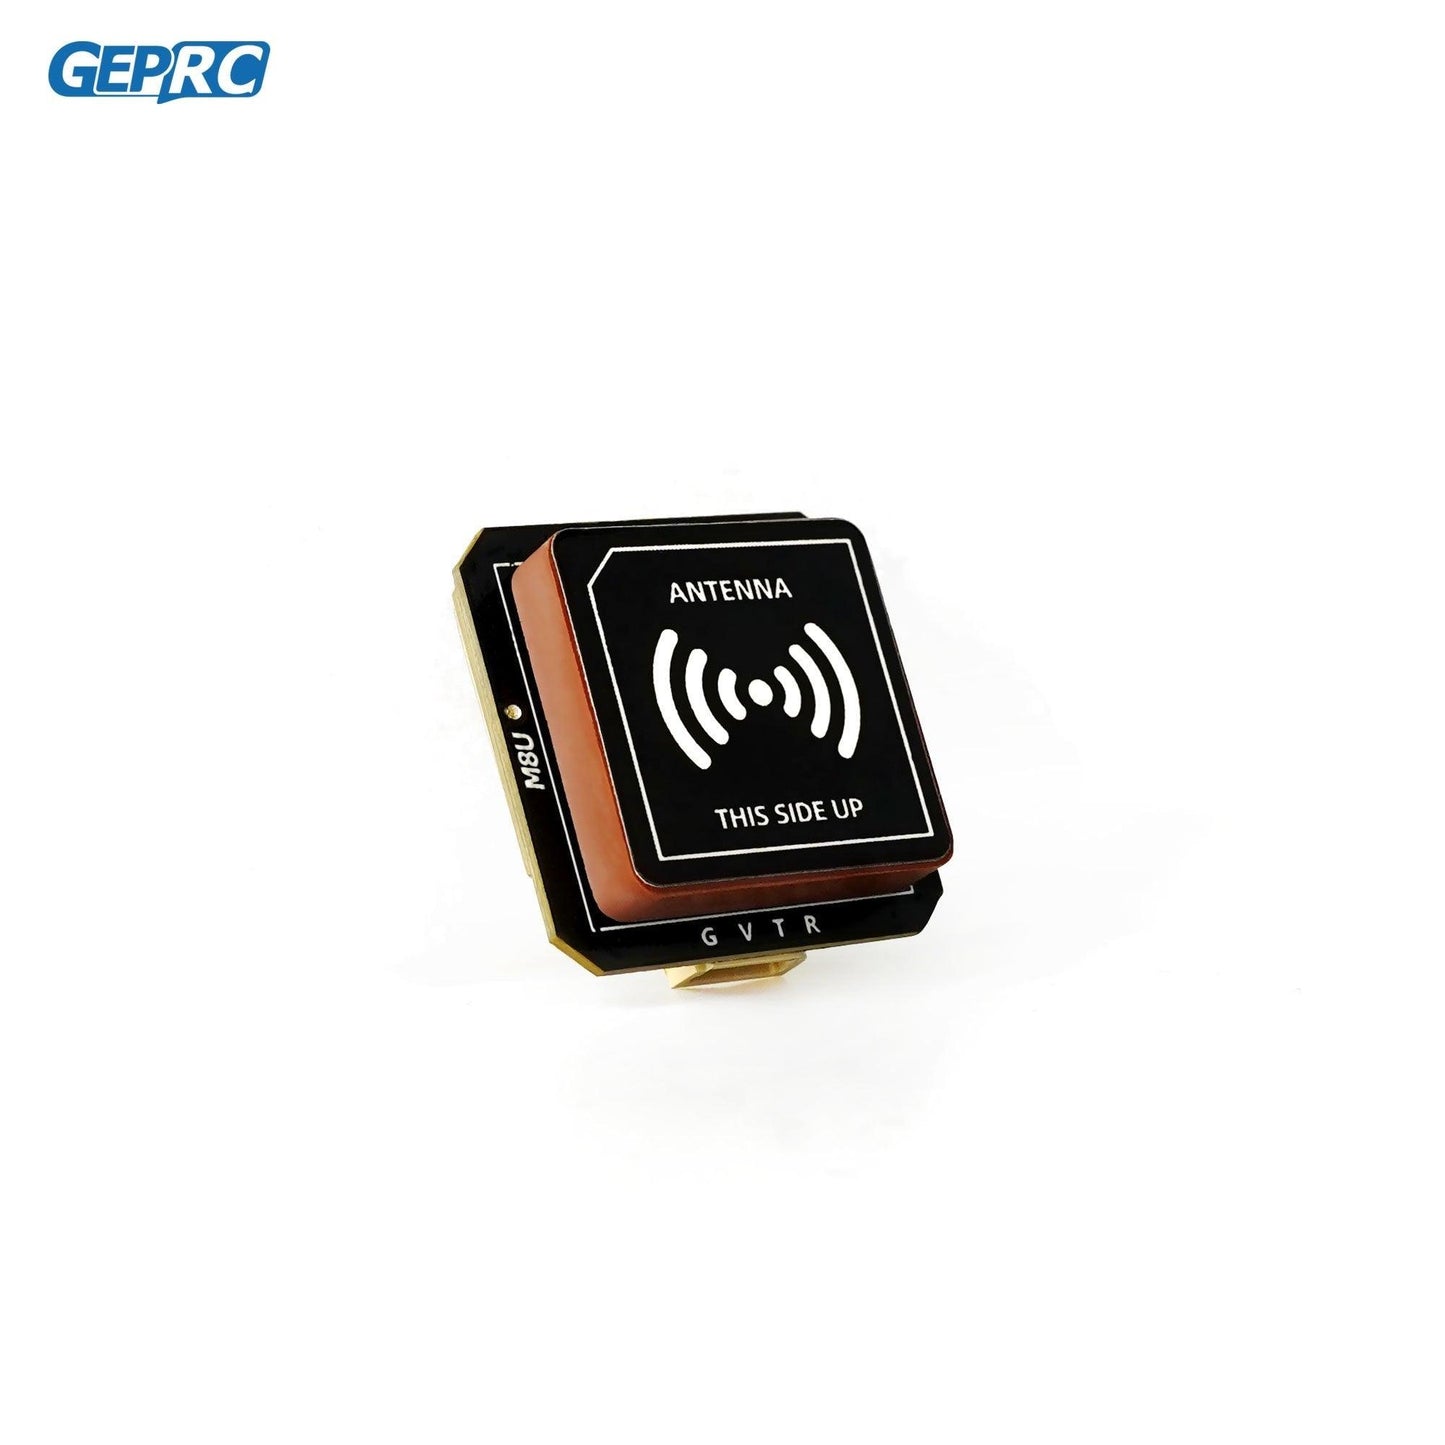 GEPRC GEP-M8U GPS Module - Integrate BDS GLONASS Module SH1.0-4Pin and Farad Capacitor for FPV Drone - RCDrone